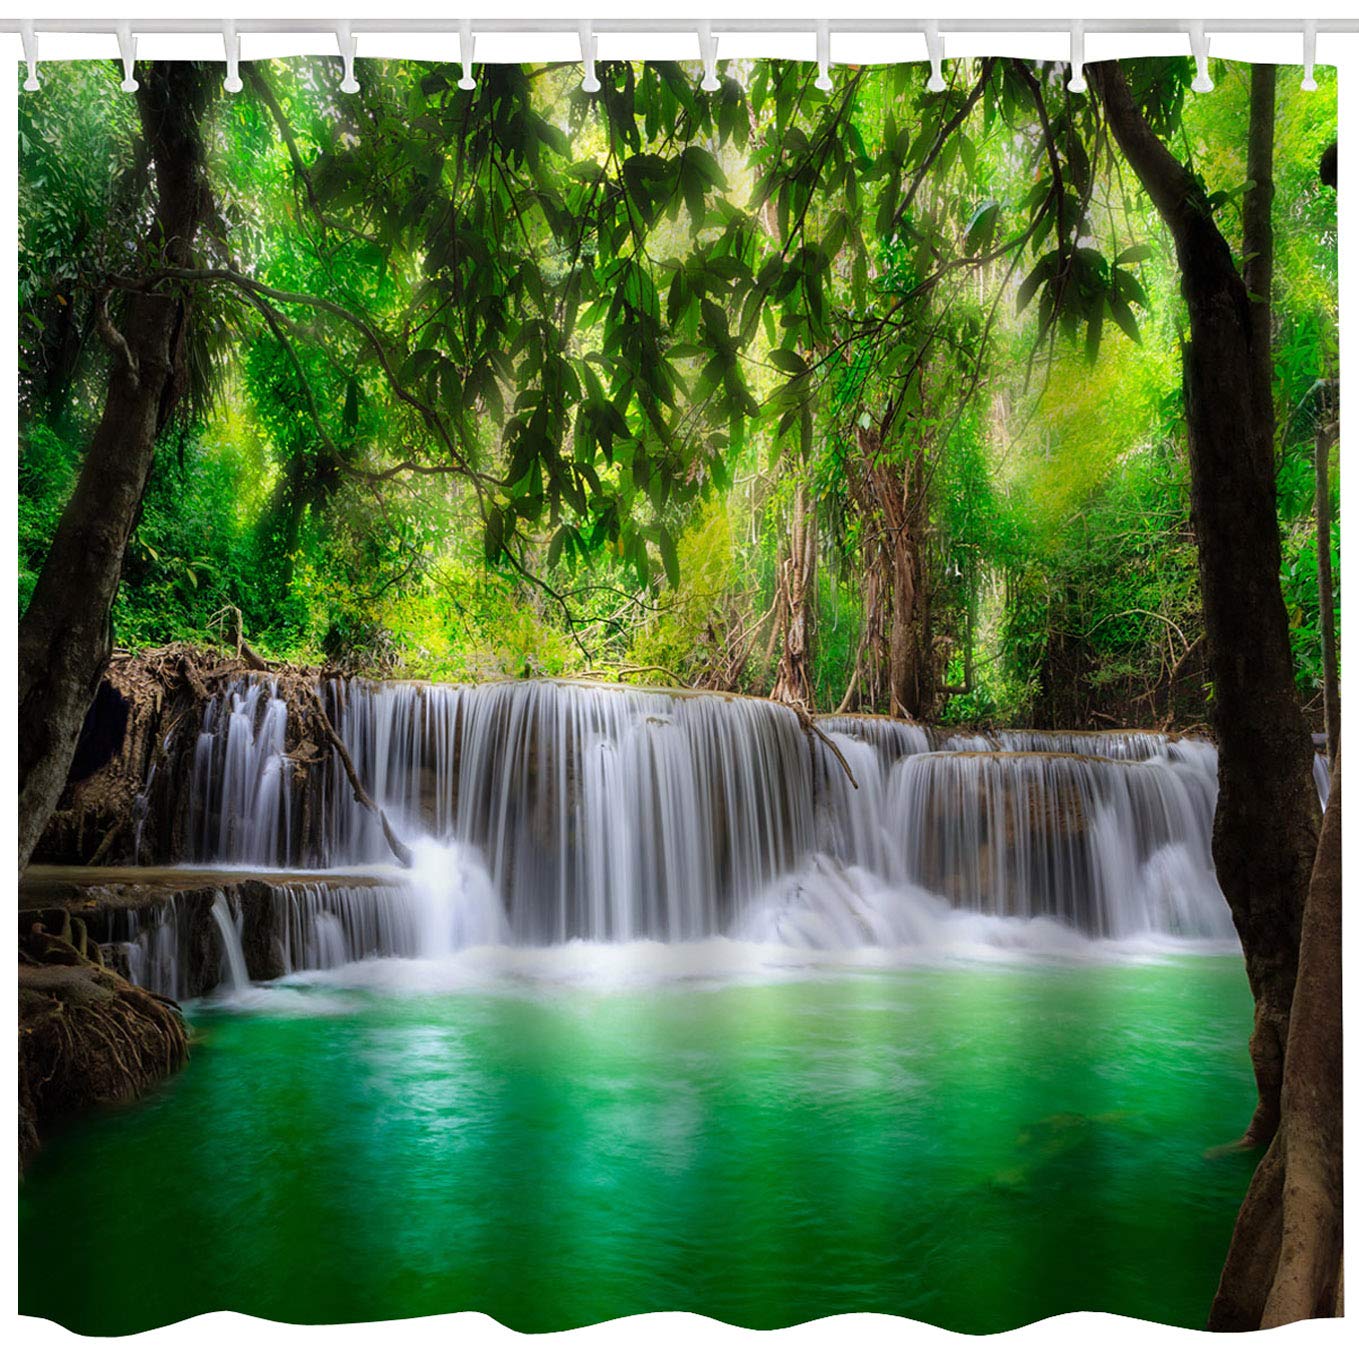 BROSHAN Green Lake Shower Curtain Set, Summer Waterfall in Forest Woodland Nature Jungle Scenery Art Printing,Waterproof Fabric Bathroom Decor Curtain with Hooks,Green Brown White, 72x 72 inch